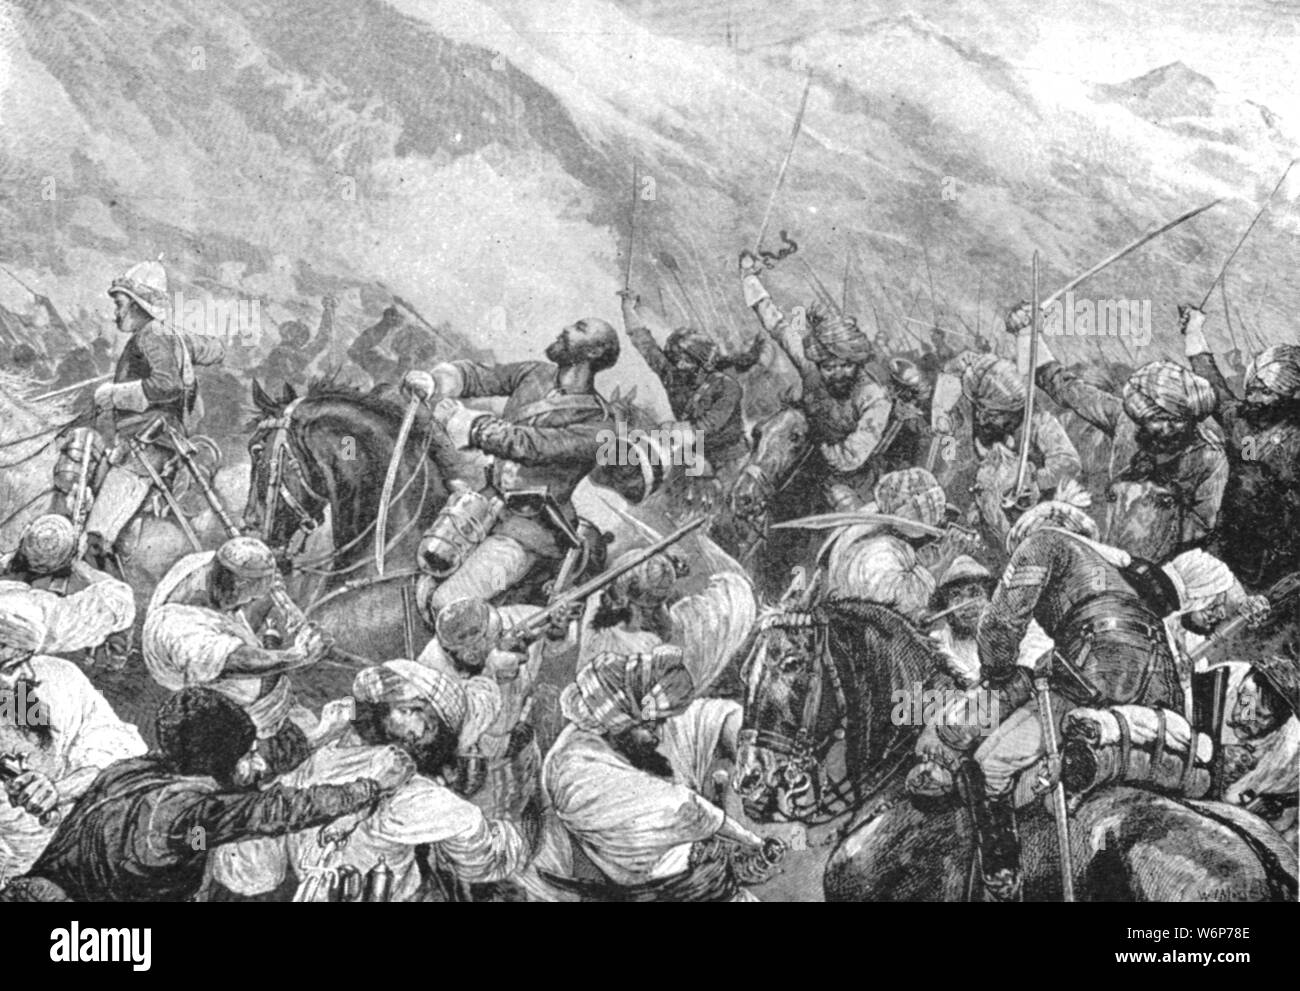 'The Afghan War, 1879: The Death of Major Wigram Battye in the Battle of Futtehabad, April 2', (1901). British soldier Major Wigram Battye (1842-1879) of the Punjab Frontier Force was shot in the chest and thigh while charging Kugiani tribesmen at the village of Khuja near Futtehabad (or Fatehabad) in Afghanistan. His orderly later reported; 'I called to Wigram, &quot;You are wounded; you had better stop.&quot; Wigram said &quot;Keep quiet&quot;, charged, and killed four men before he was killed'. From &quot;The Illustrated London News Record of the Glorious Reign of Queen Victoria 1837-1901: Stock Photo